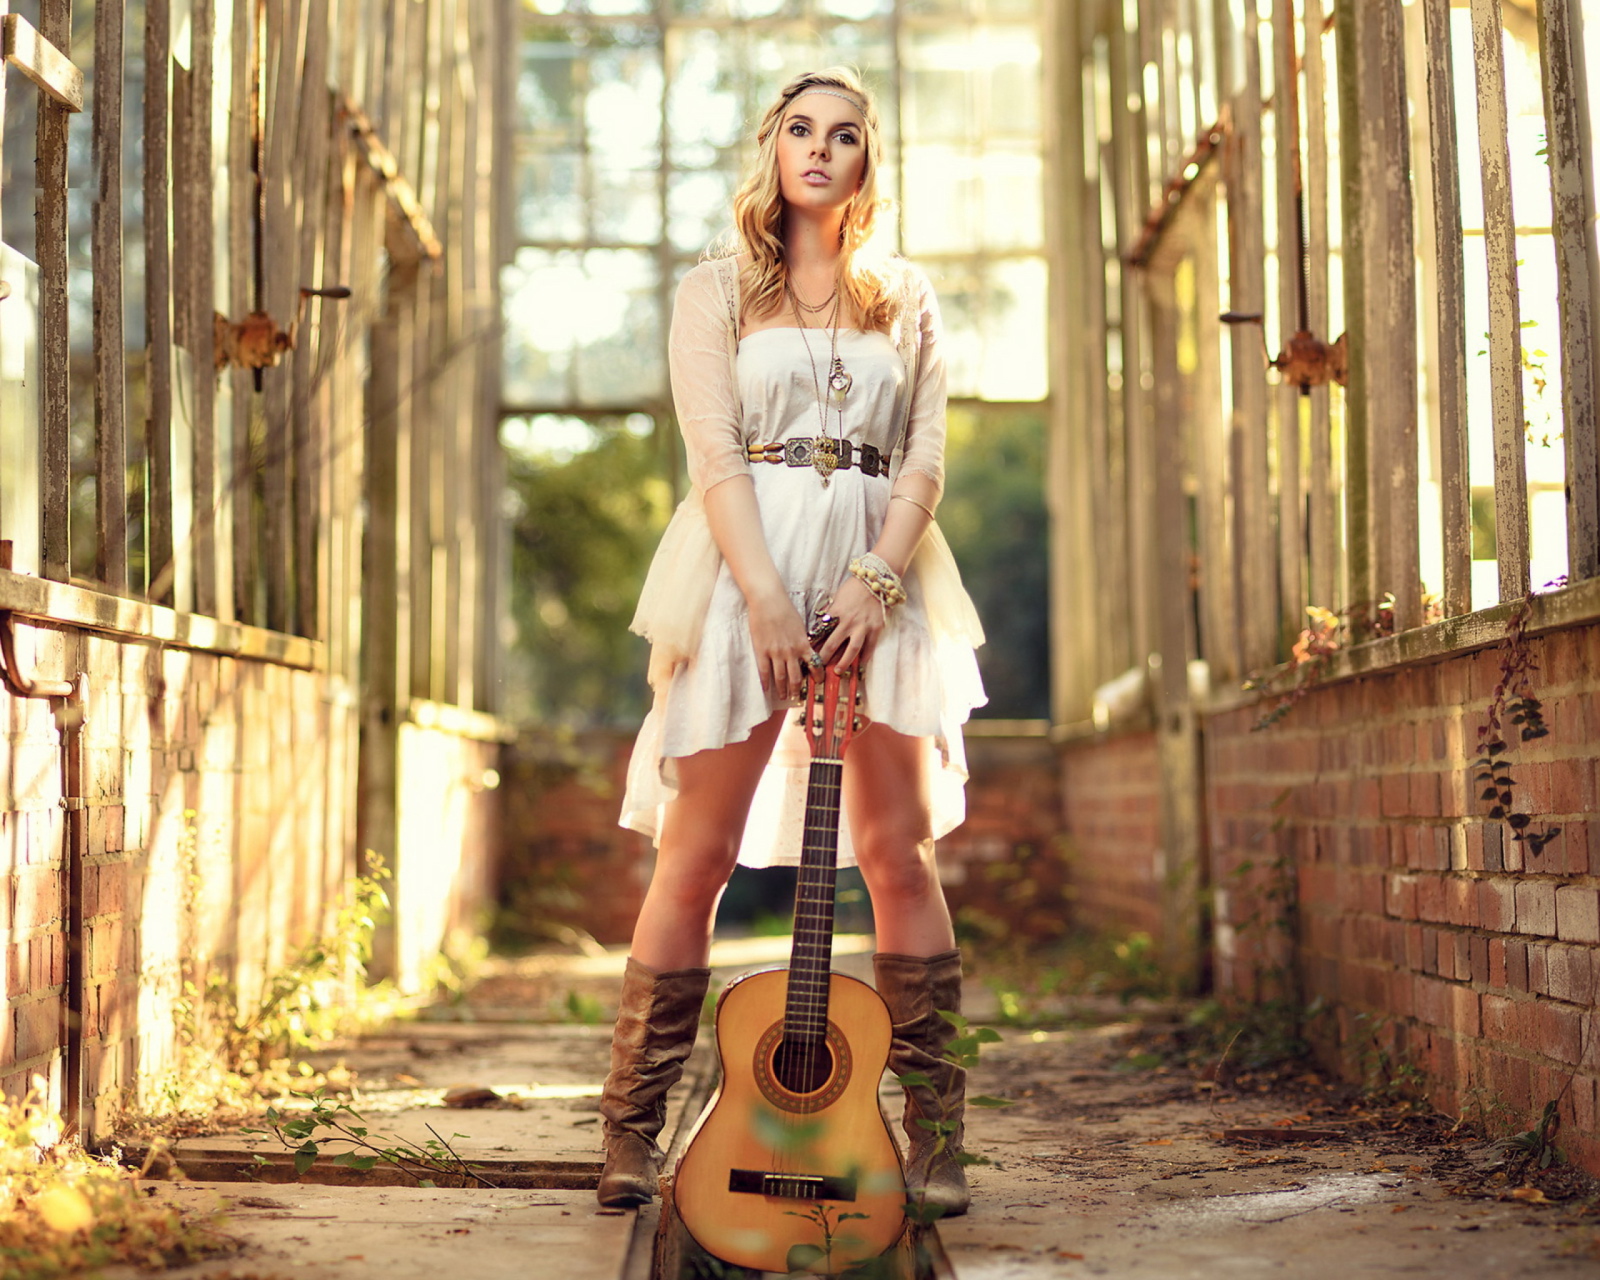 Girl With Guitar Chic Country Style screenshot #1 1600x1280